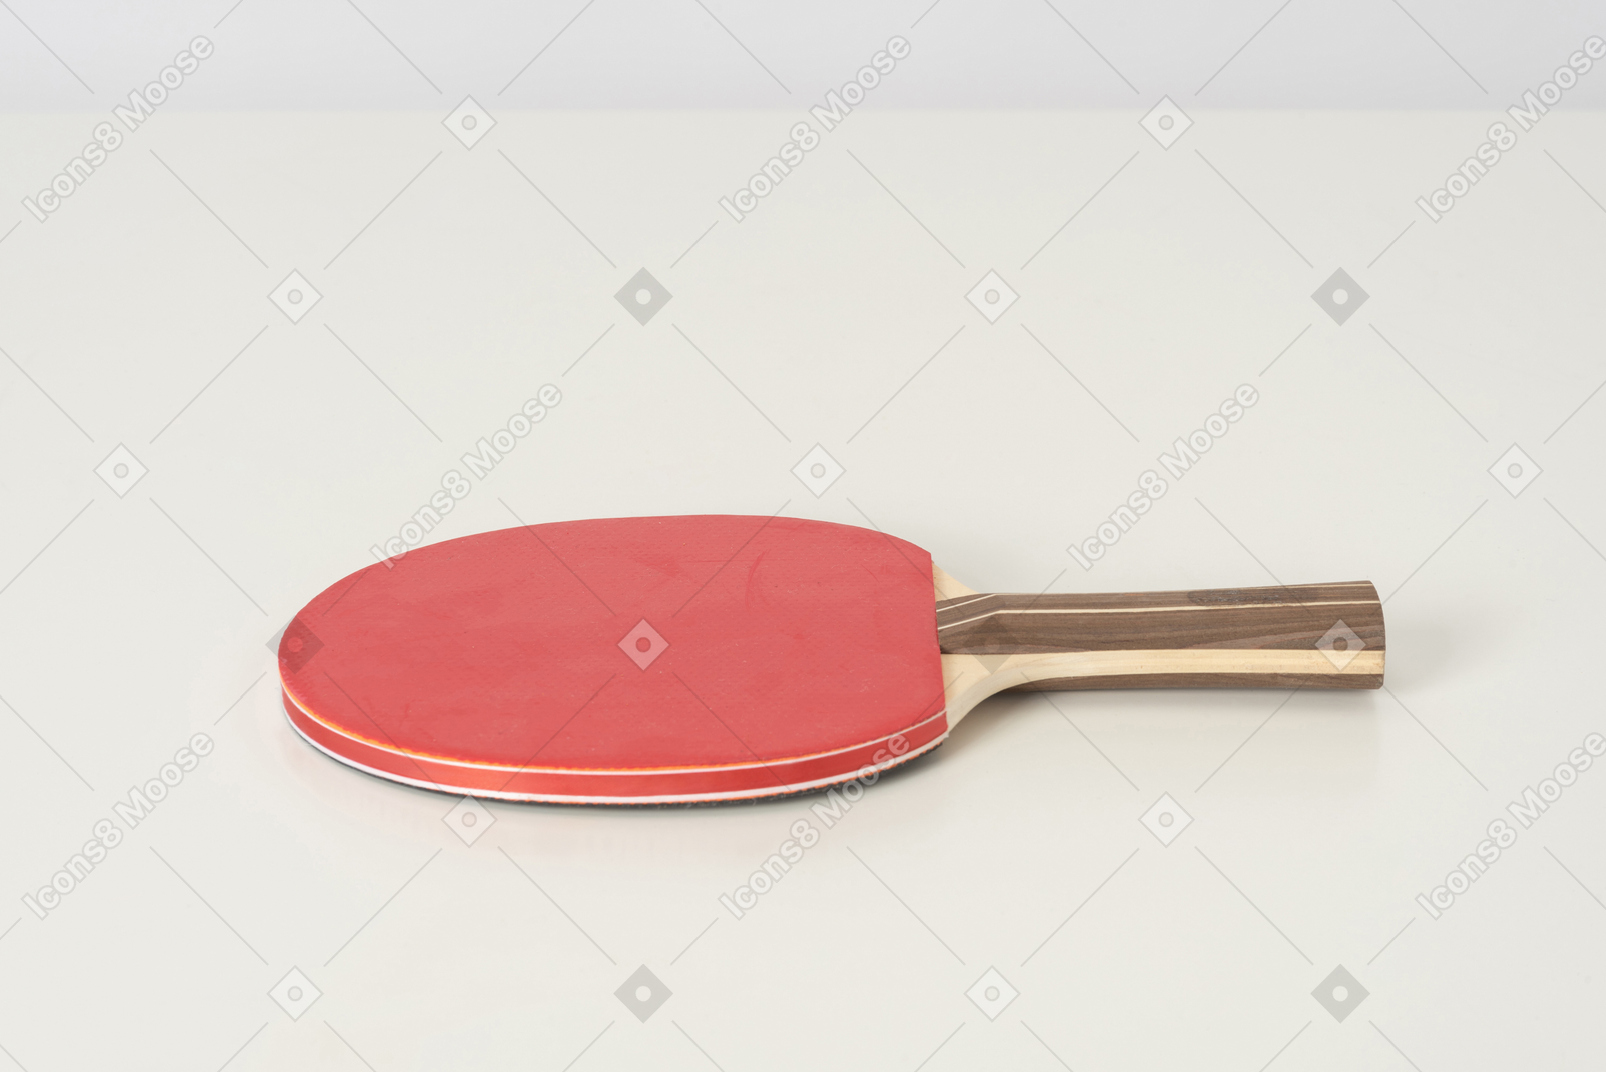 Red tennis racket on a white backgroud